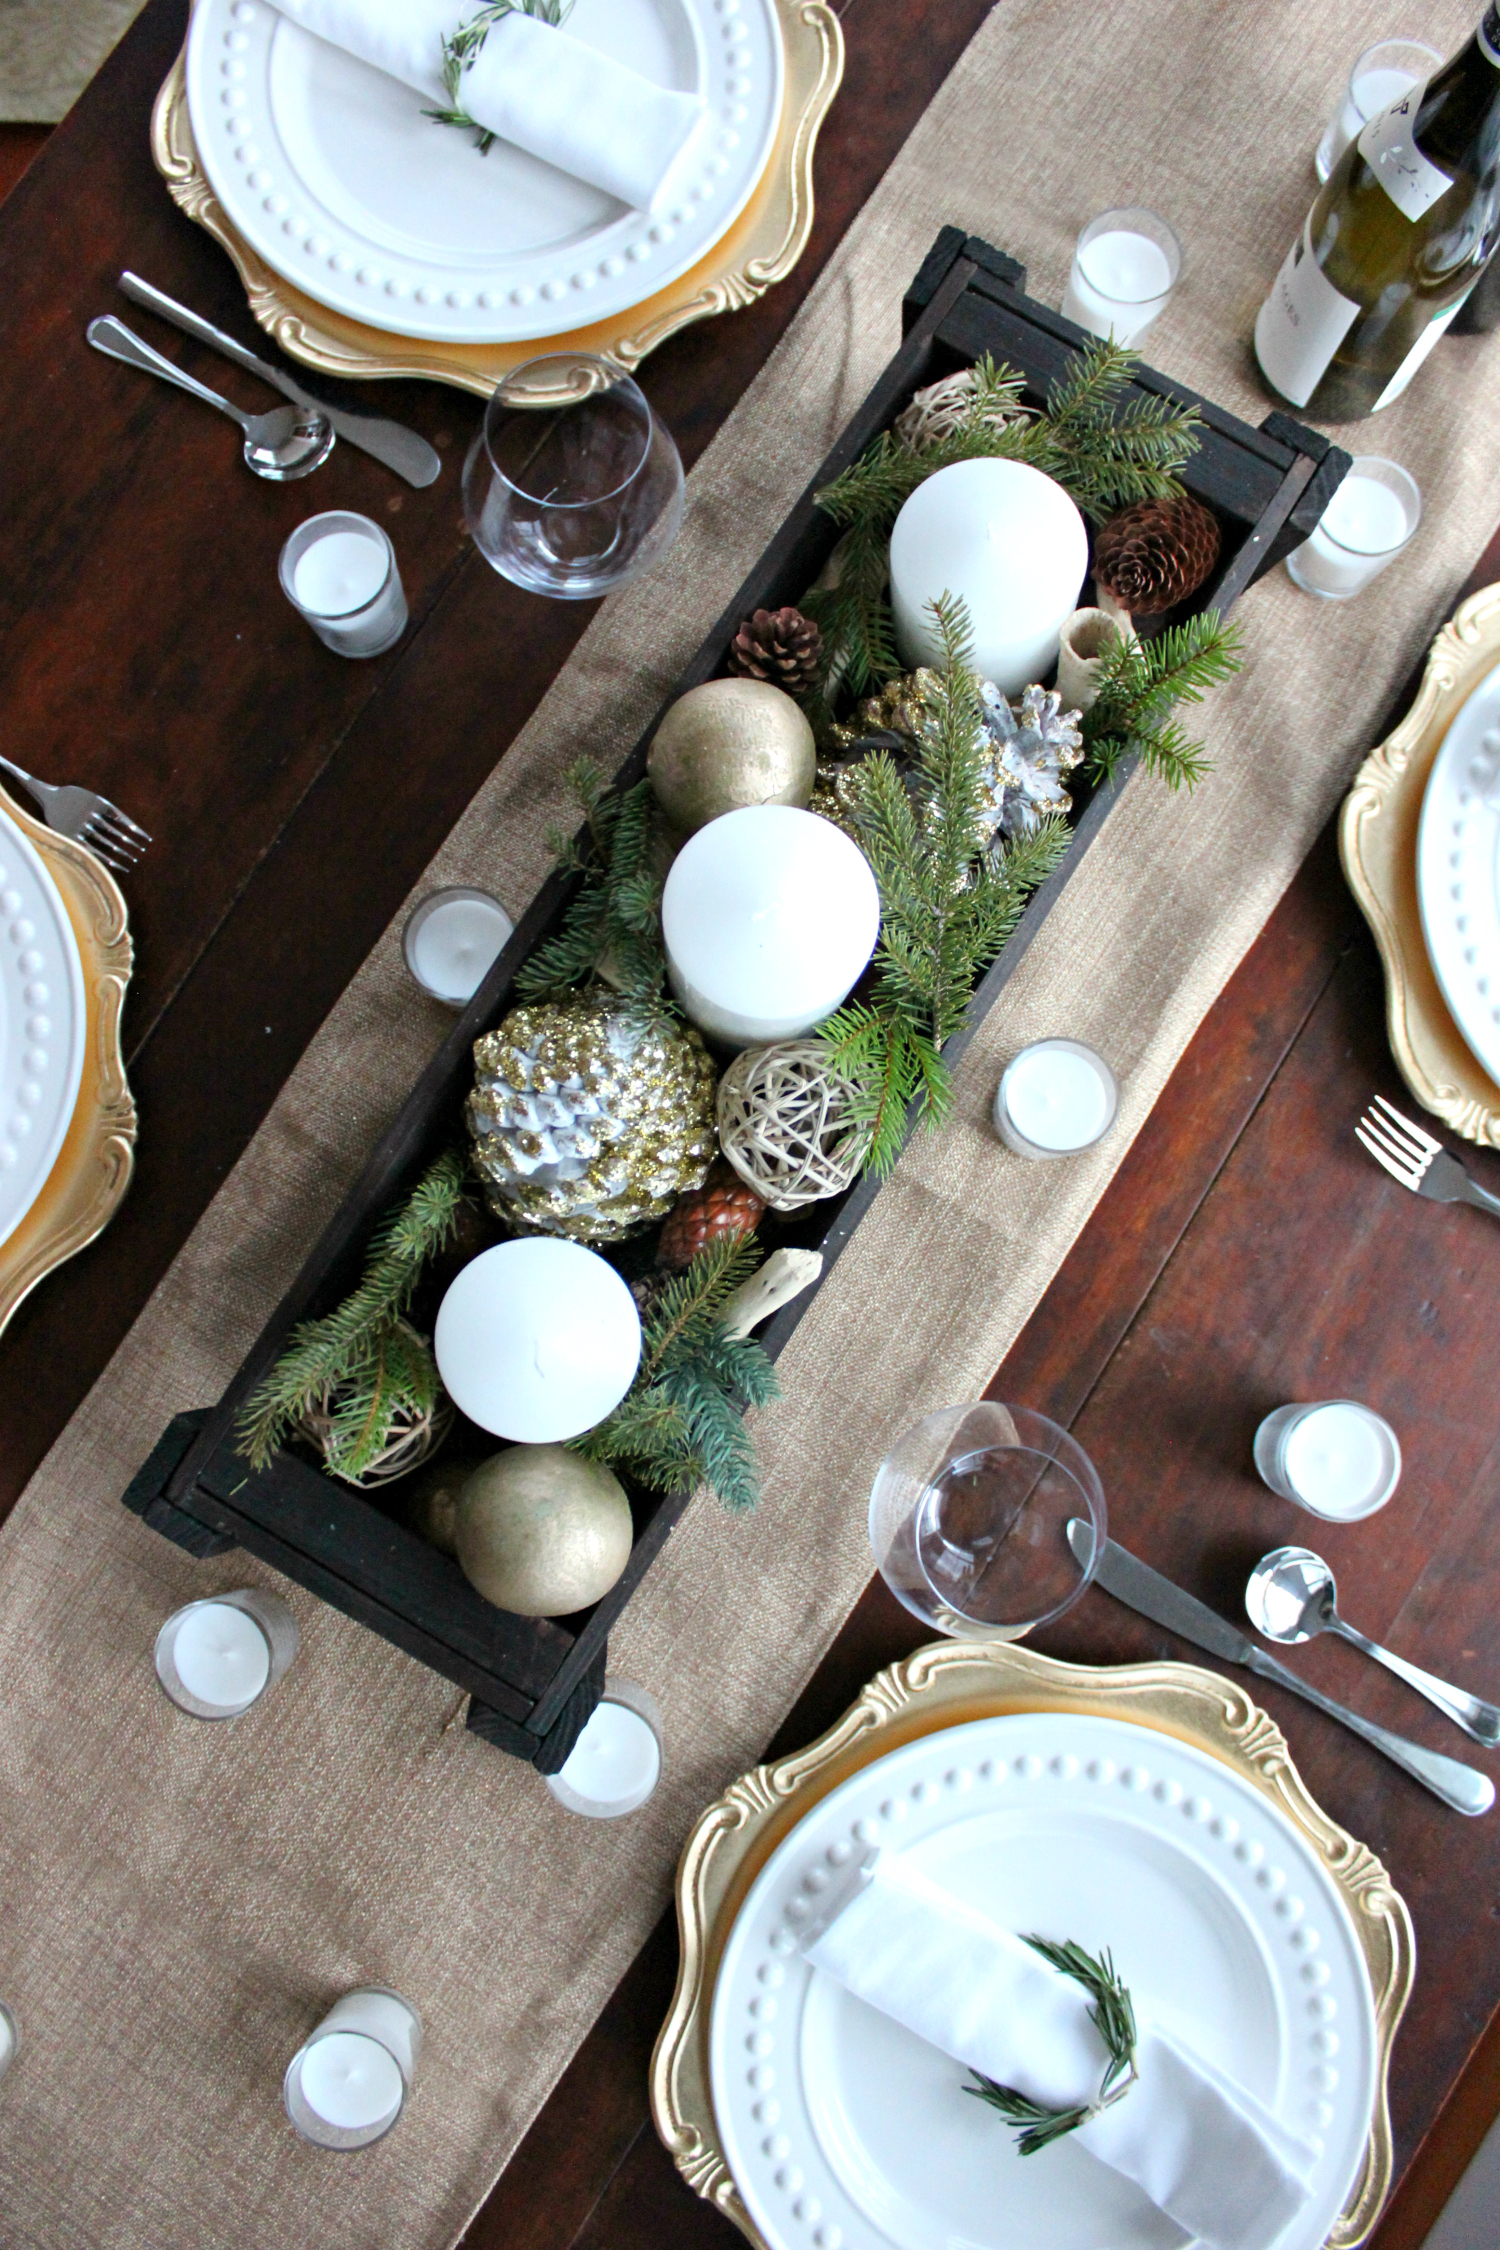 Easy-to-Make Fall Table Decorations